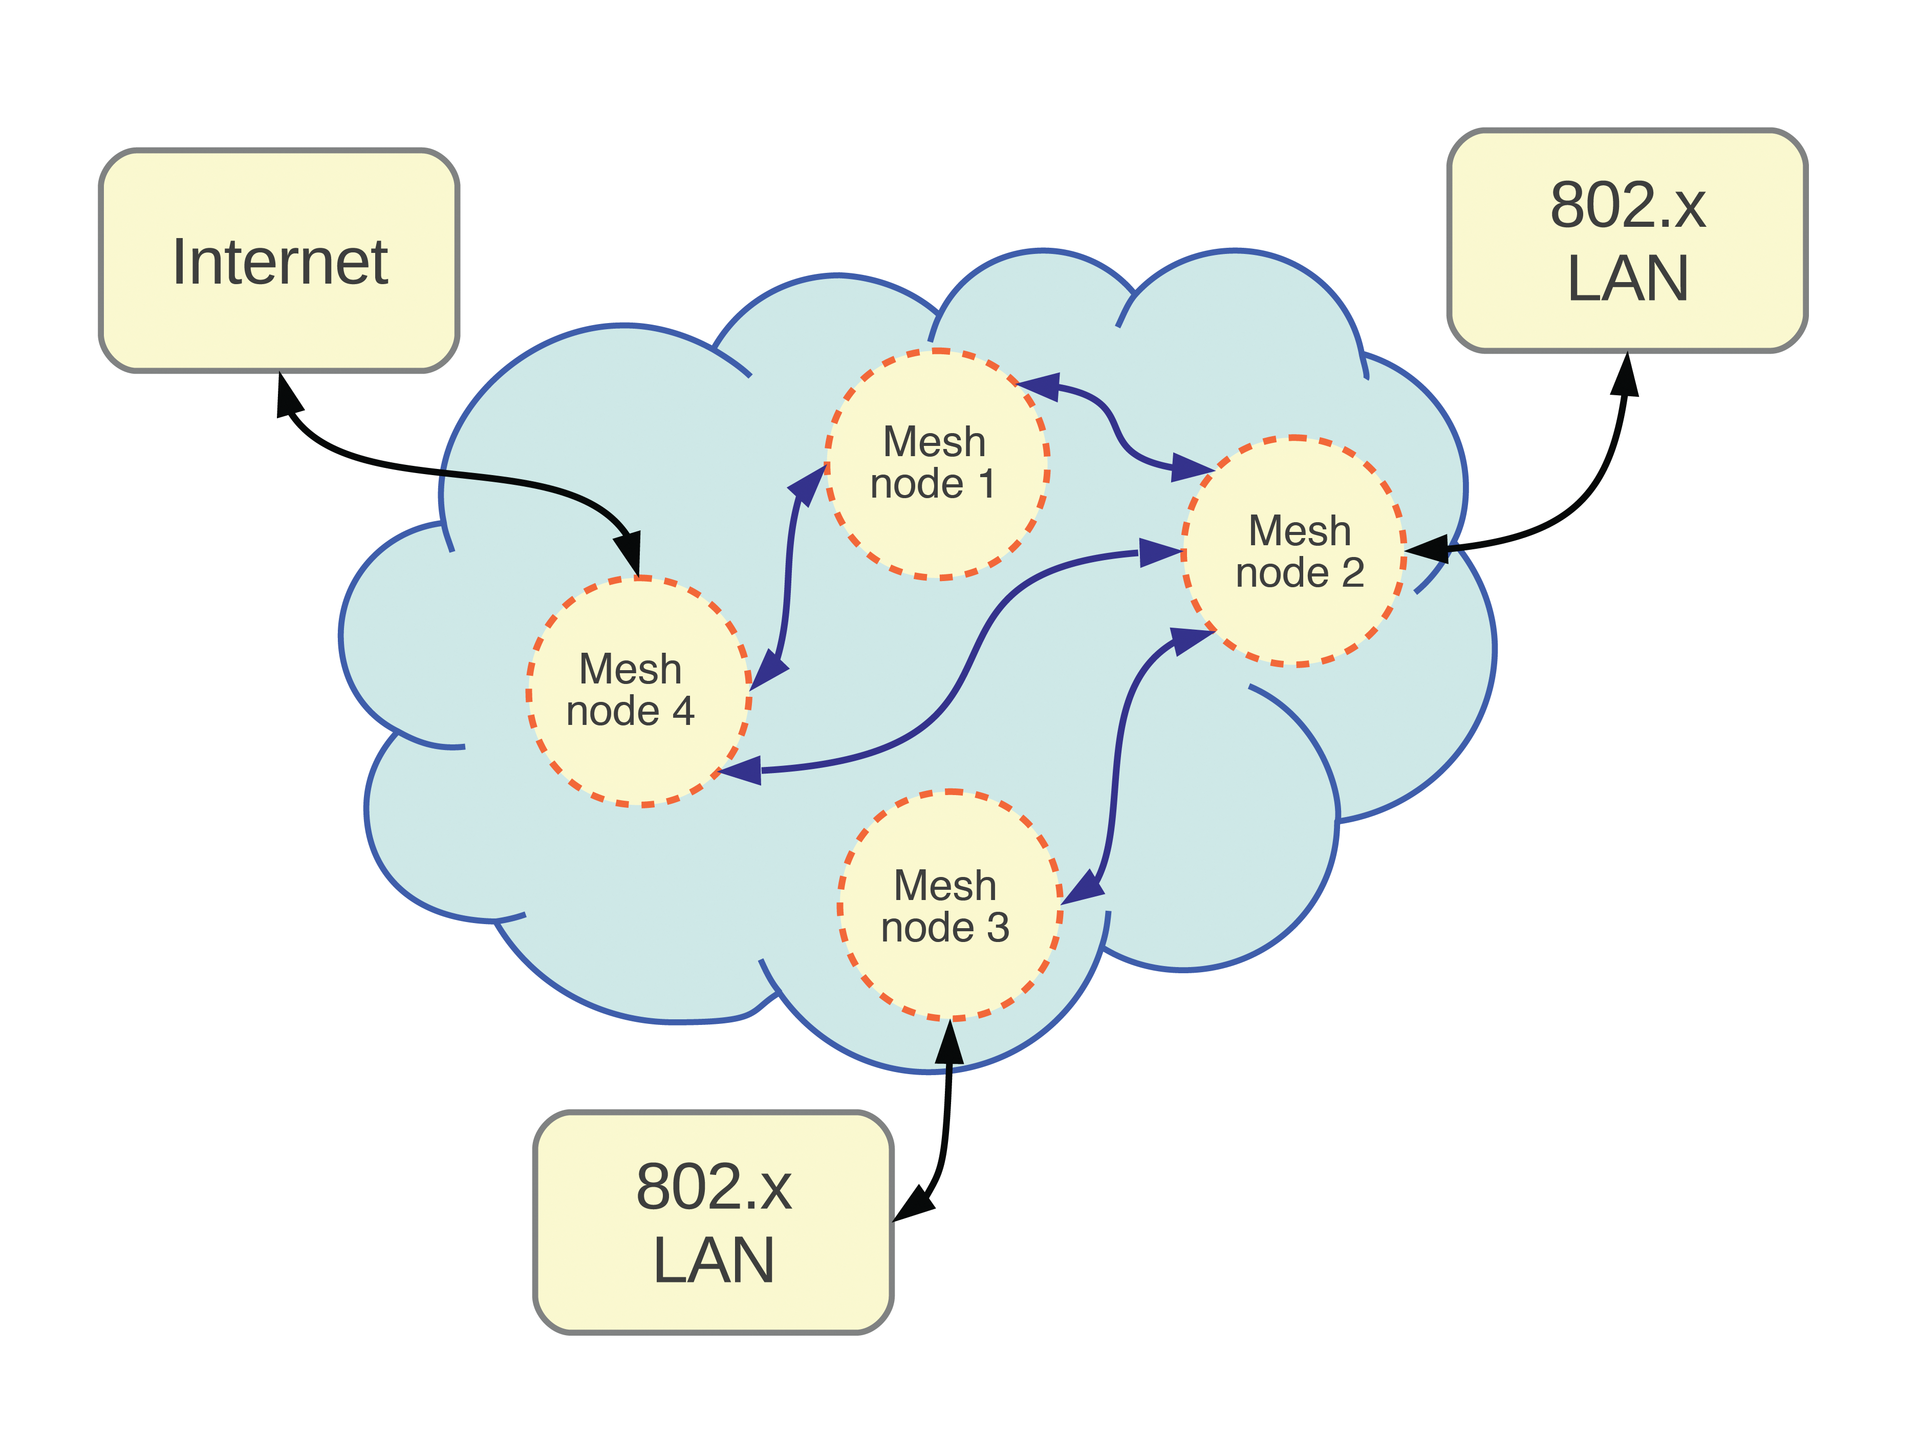 The structure of a wireless mesh network is similar to a cellular network. 